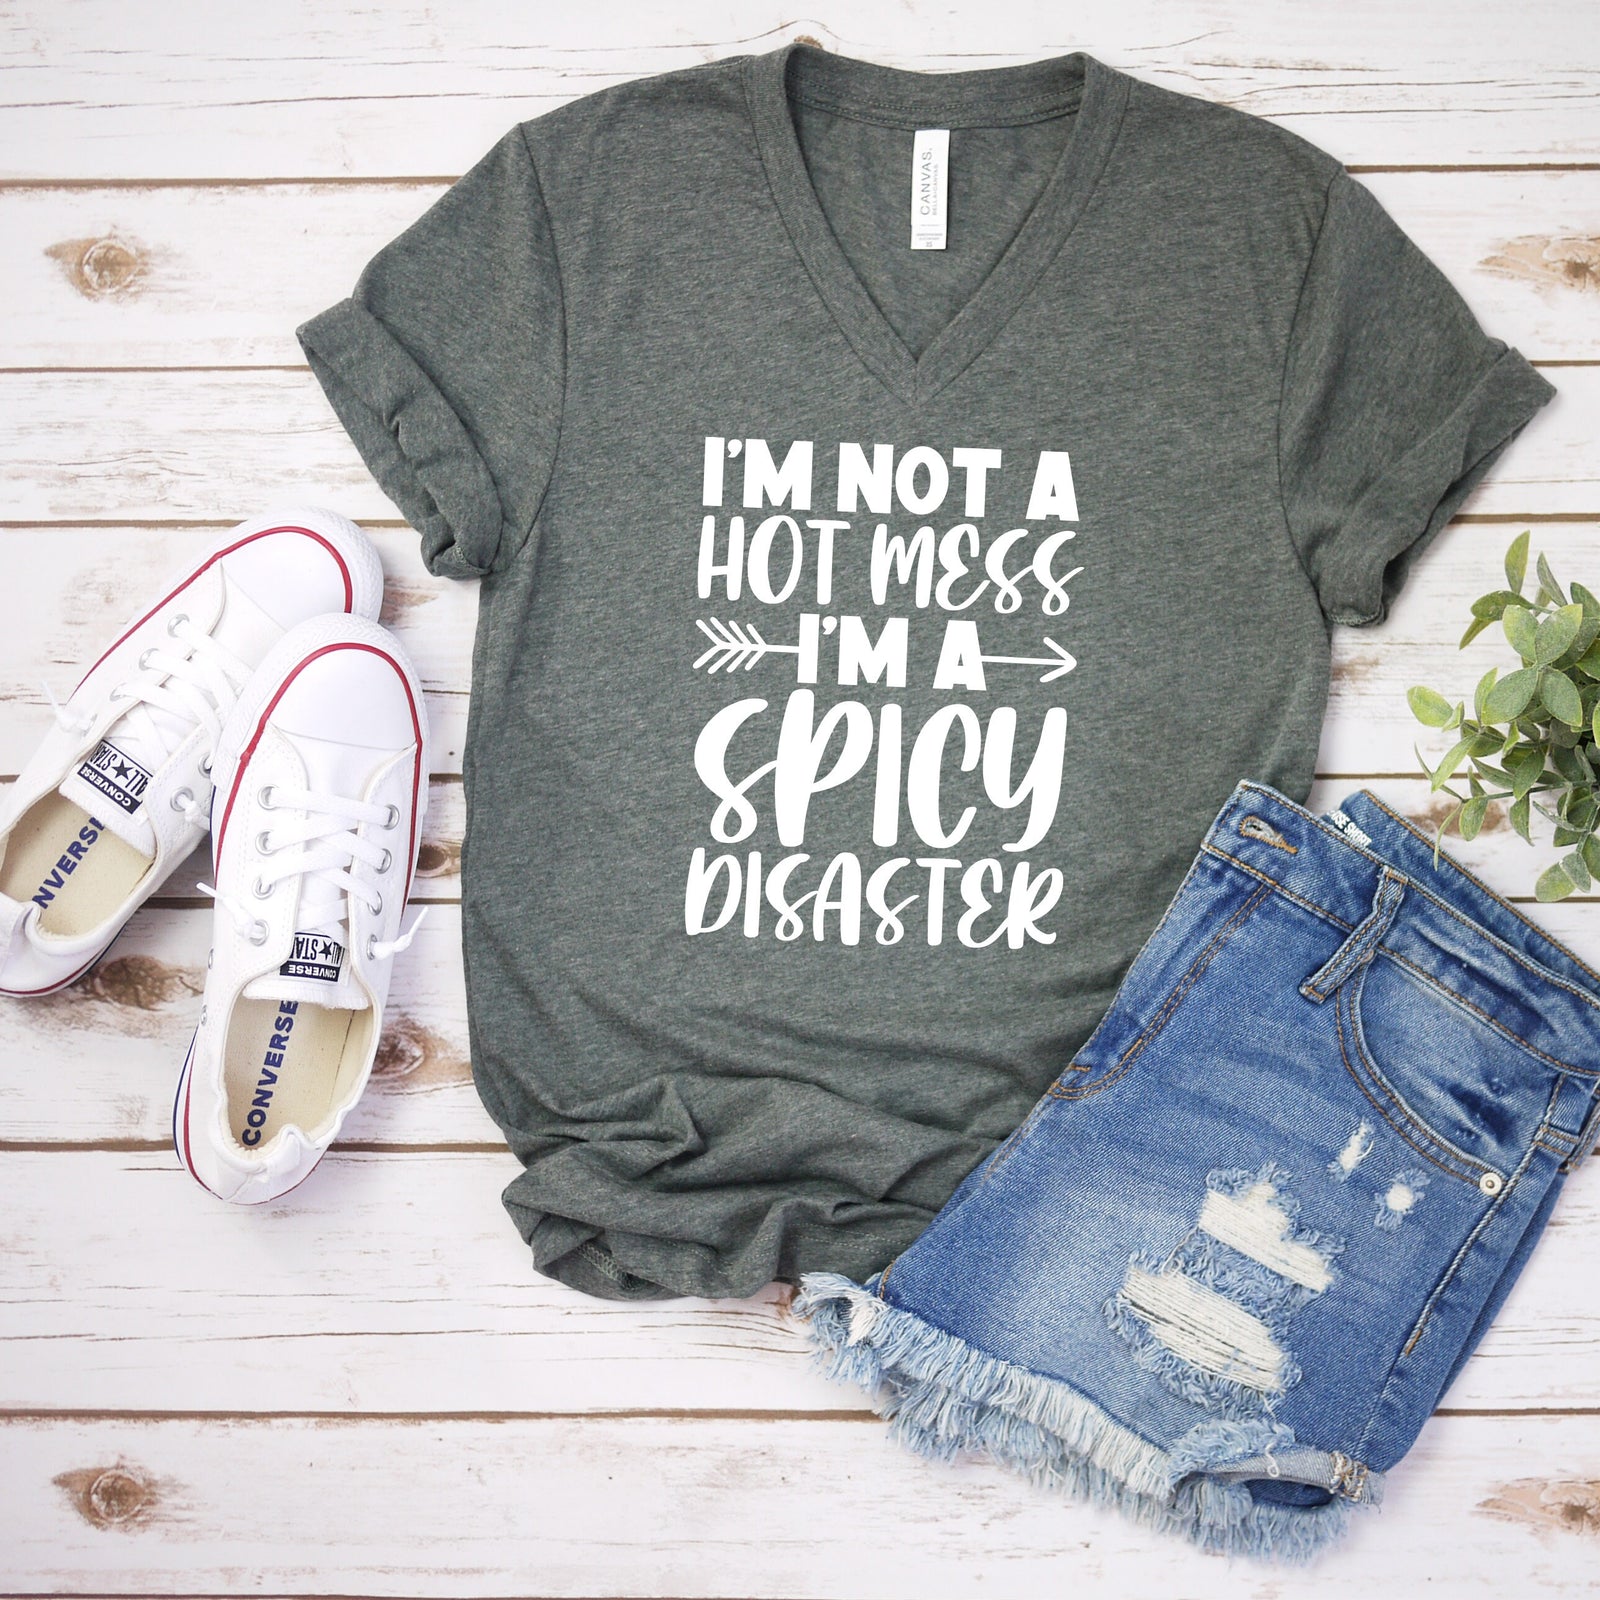 I'm Not a Hot Mess I'm A Spicy Disaster T Shirt - Funny Sarcastic T Shirt - Humor Shirt - Sort of Sweet and Savage